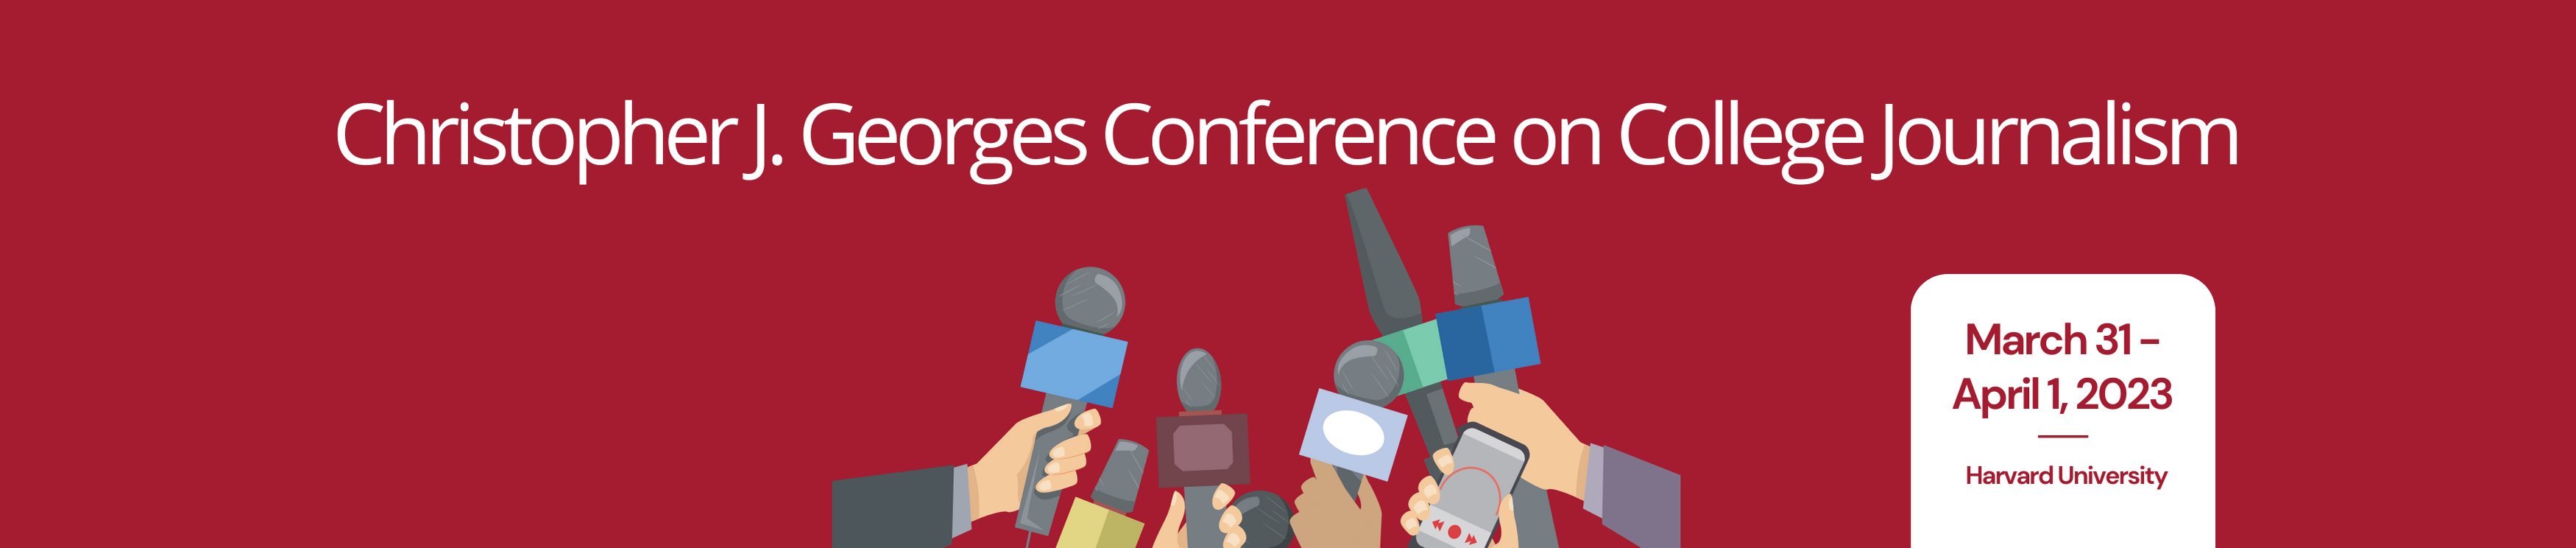 Banner Image for Conference Schedule